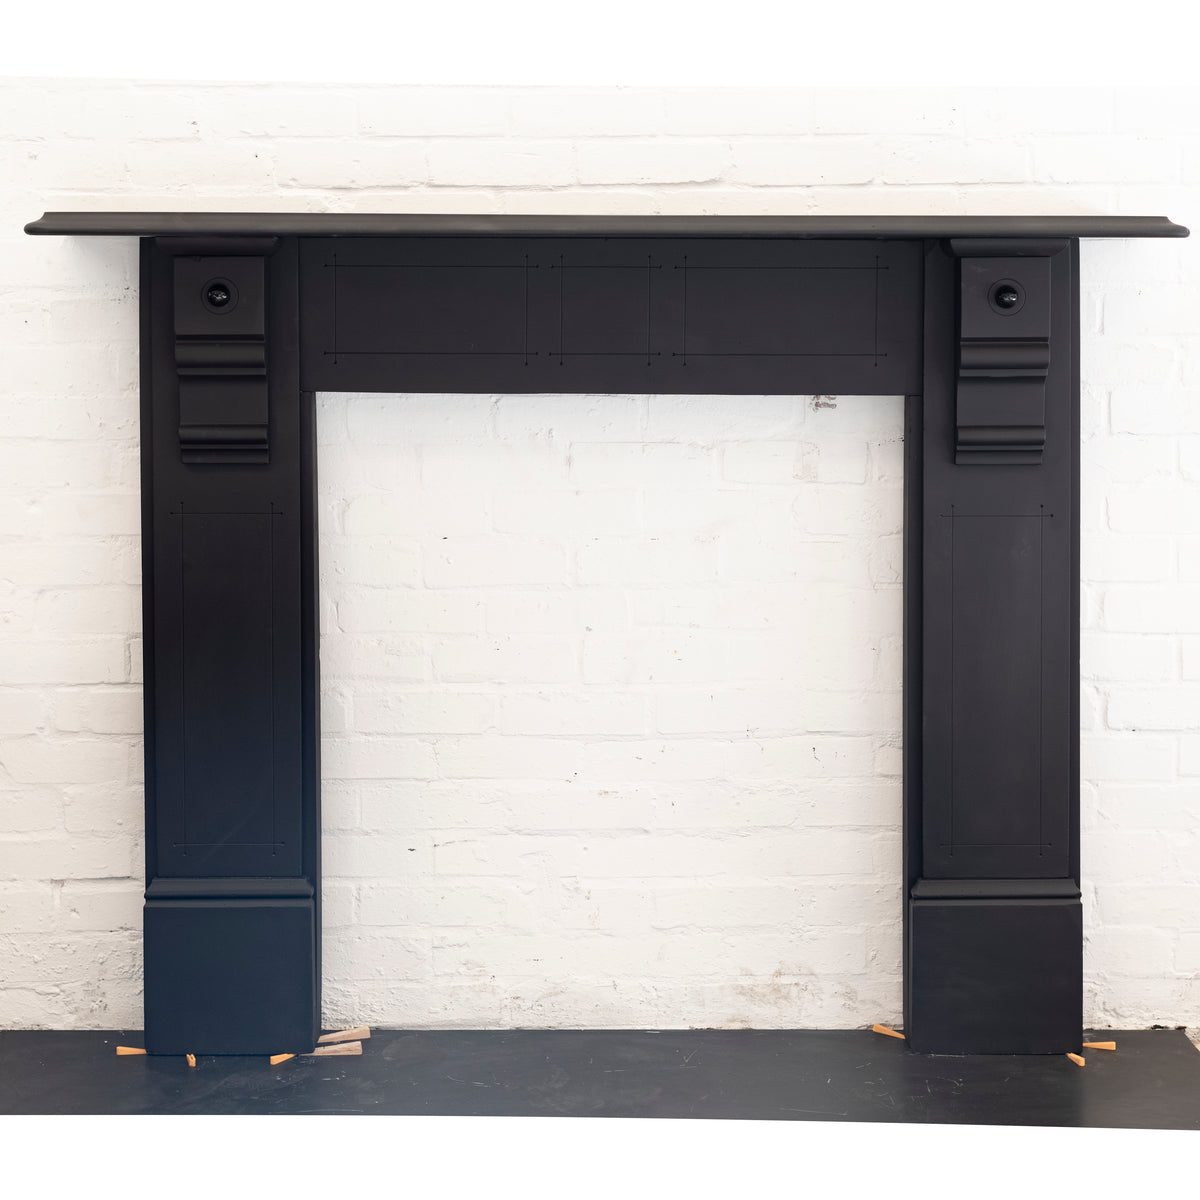 Antique Slate Fireplace Surround With Corbels | The Architectural Forum